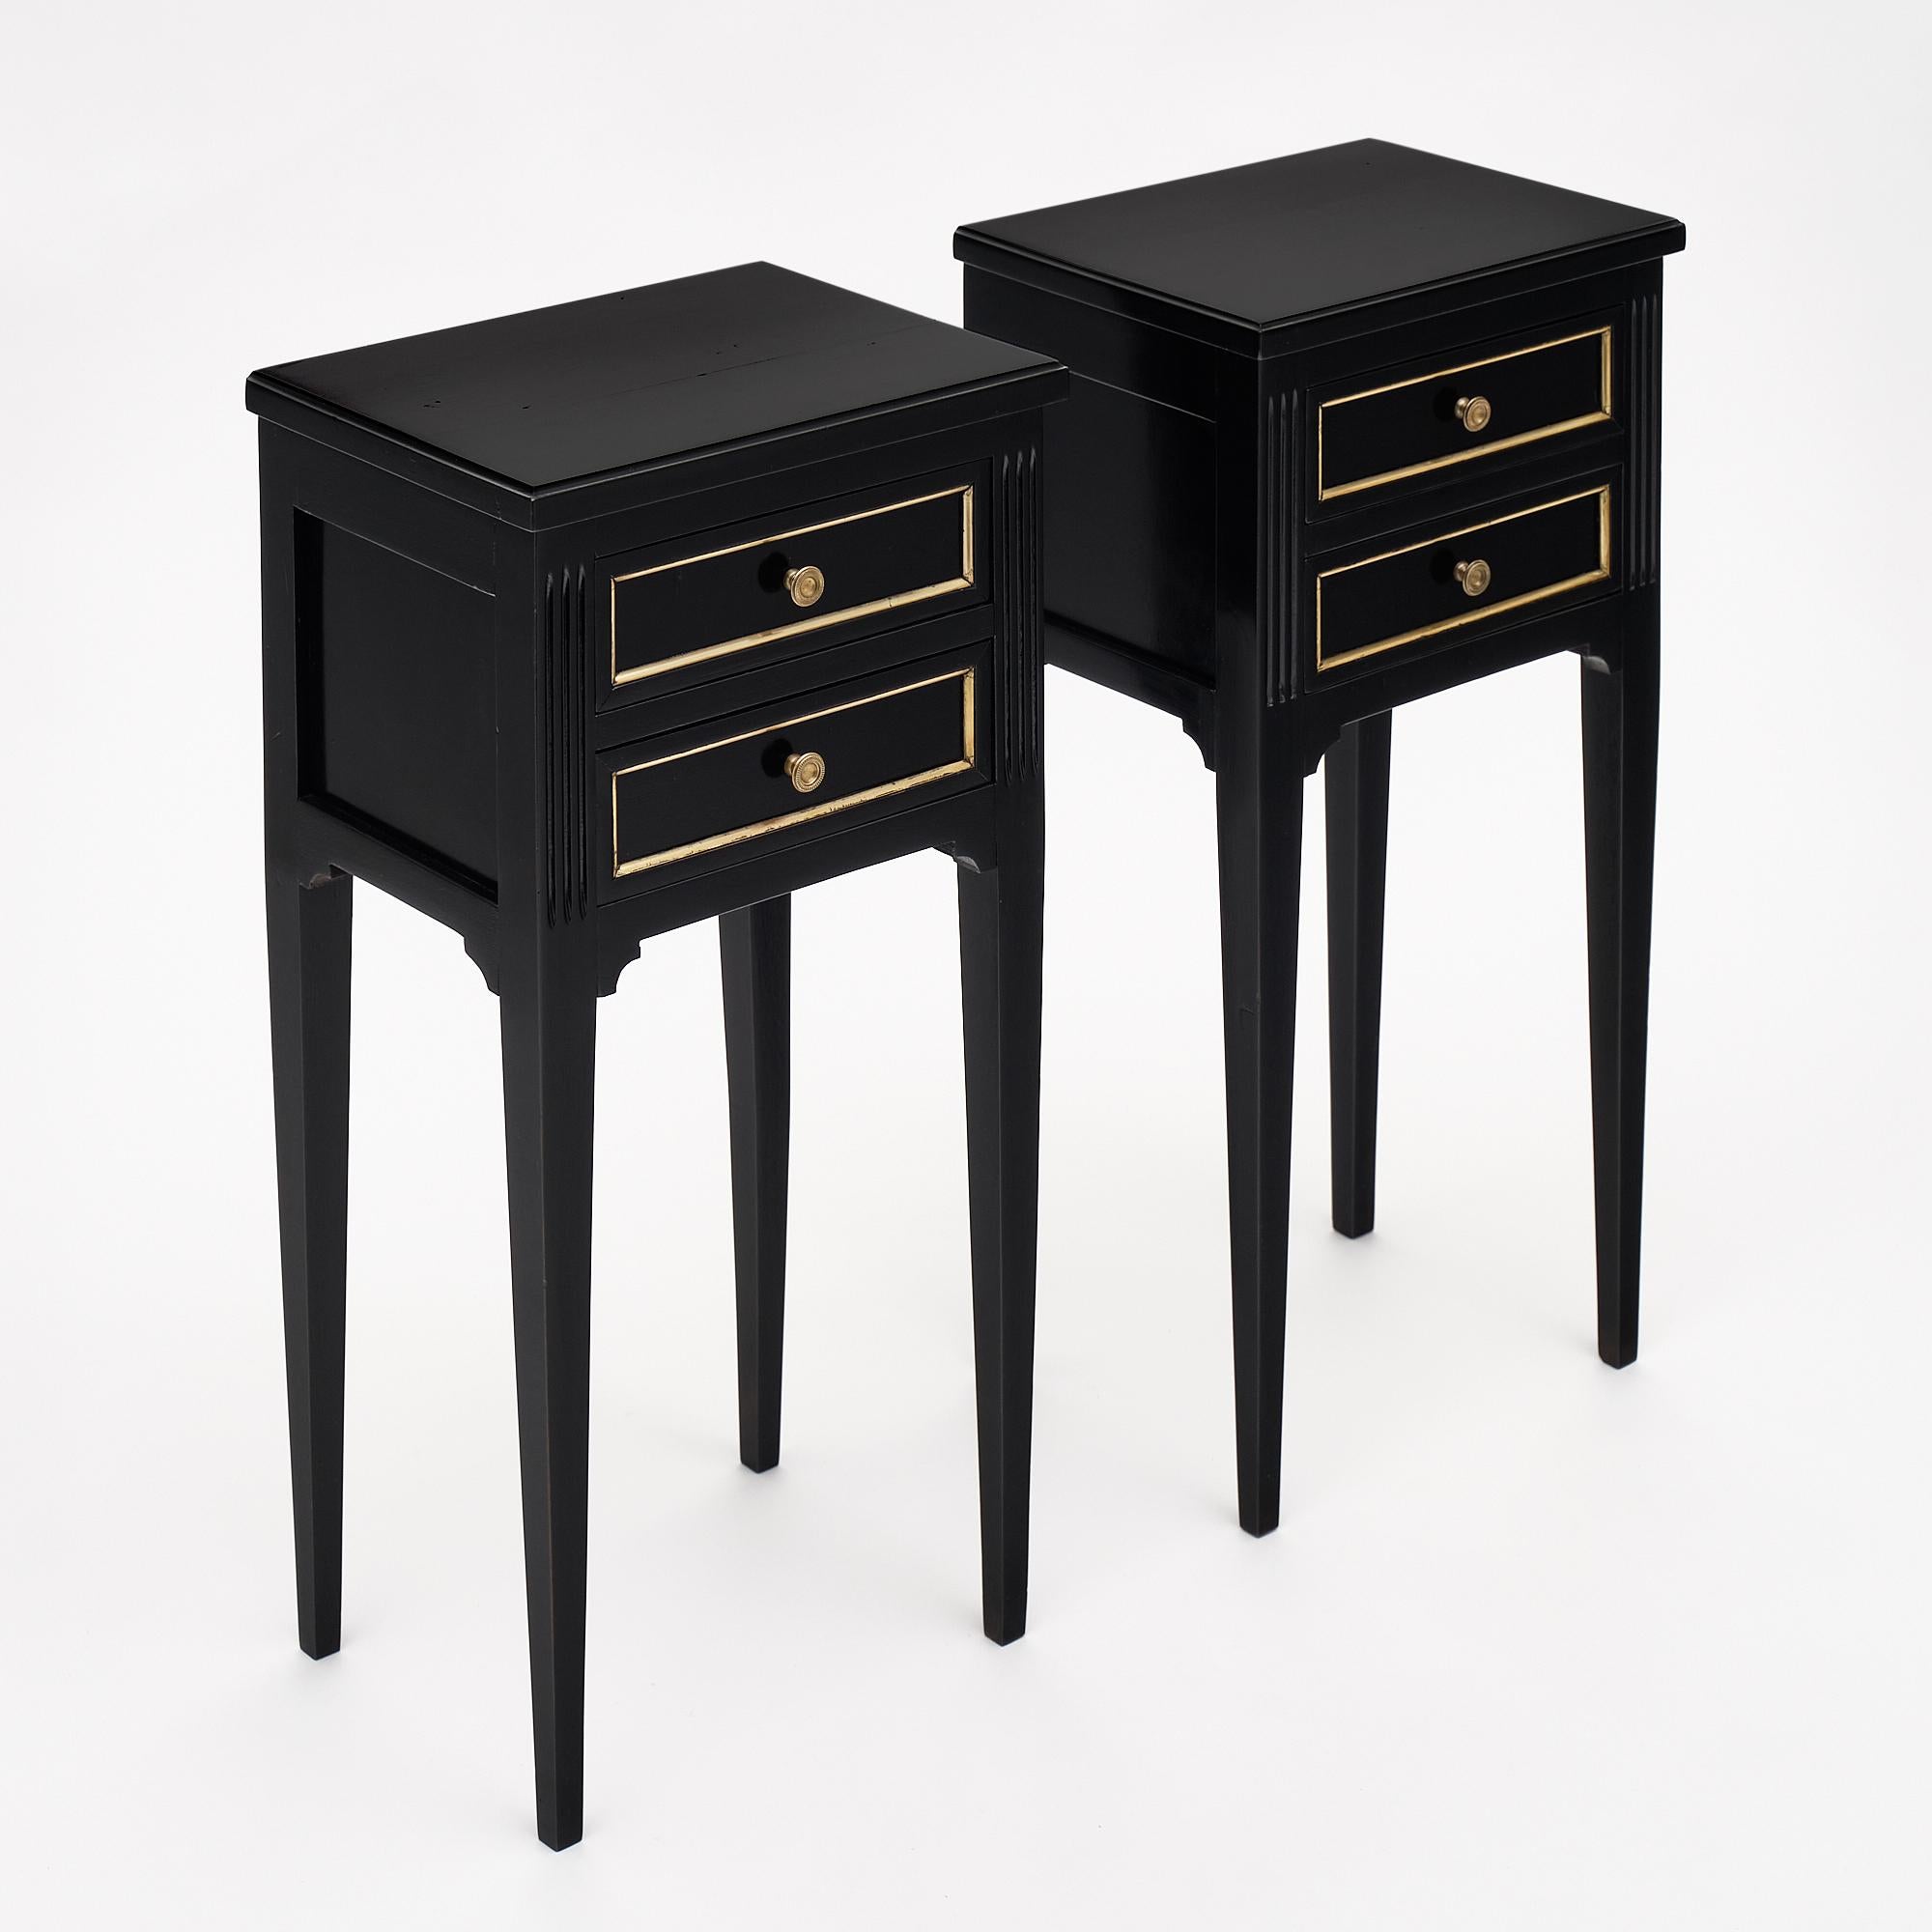 Pair of ebonized Louis XVI style side tables from France. We love the antique style and long tapered legs. They are made of solid mahogany that has been finished in a lustrous French polish. Each has two dovetailed drawers; trimmed with brass.